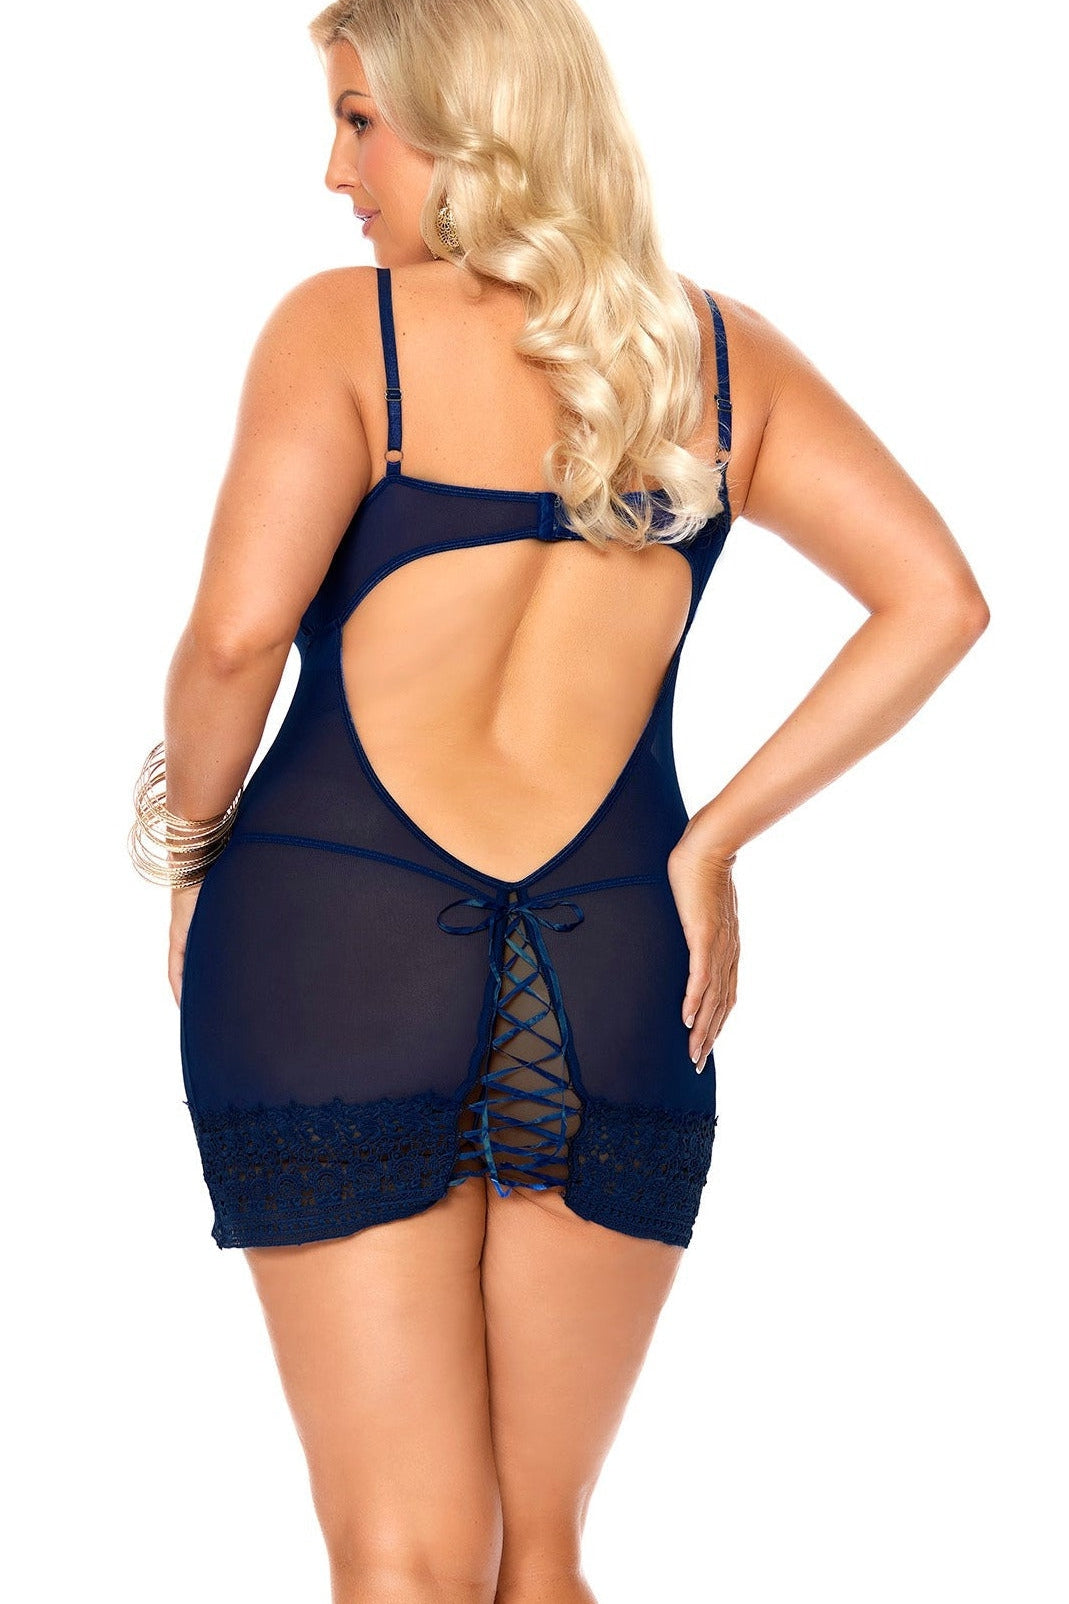 Plus Size Crochet Lace Babydoll With Underwire Demi Cups – Lady